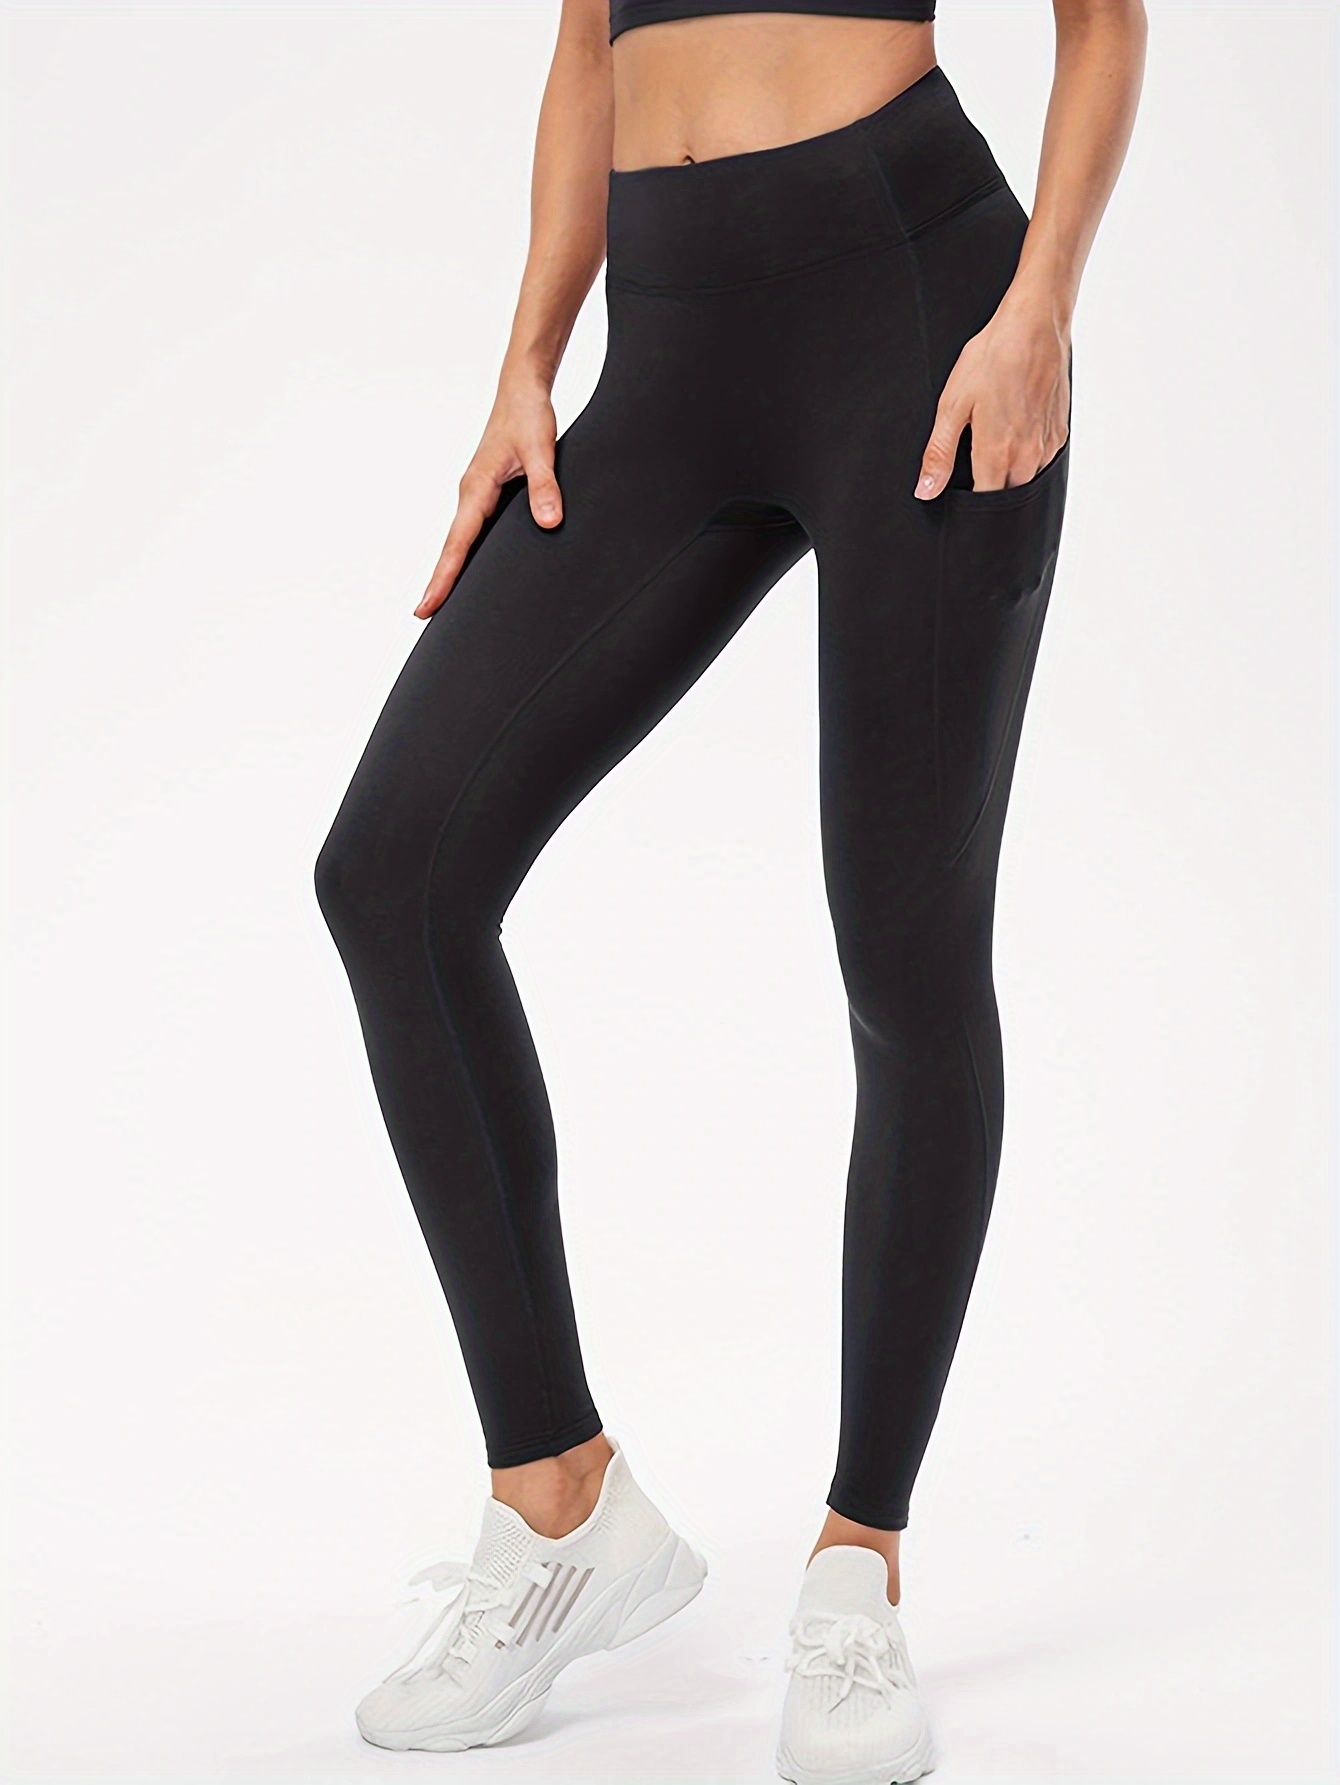 Solid High Waist Skinny Leggings Casual Butt Lifting Thermal